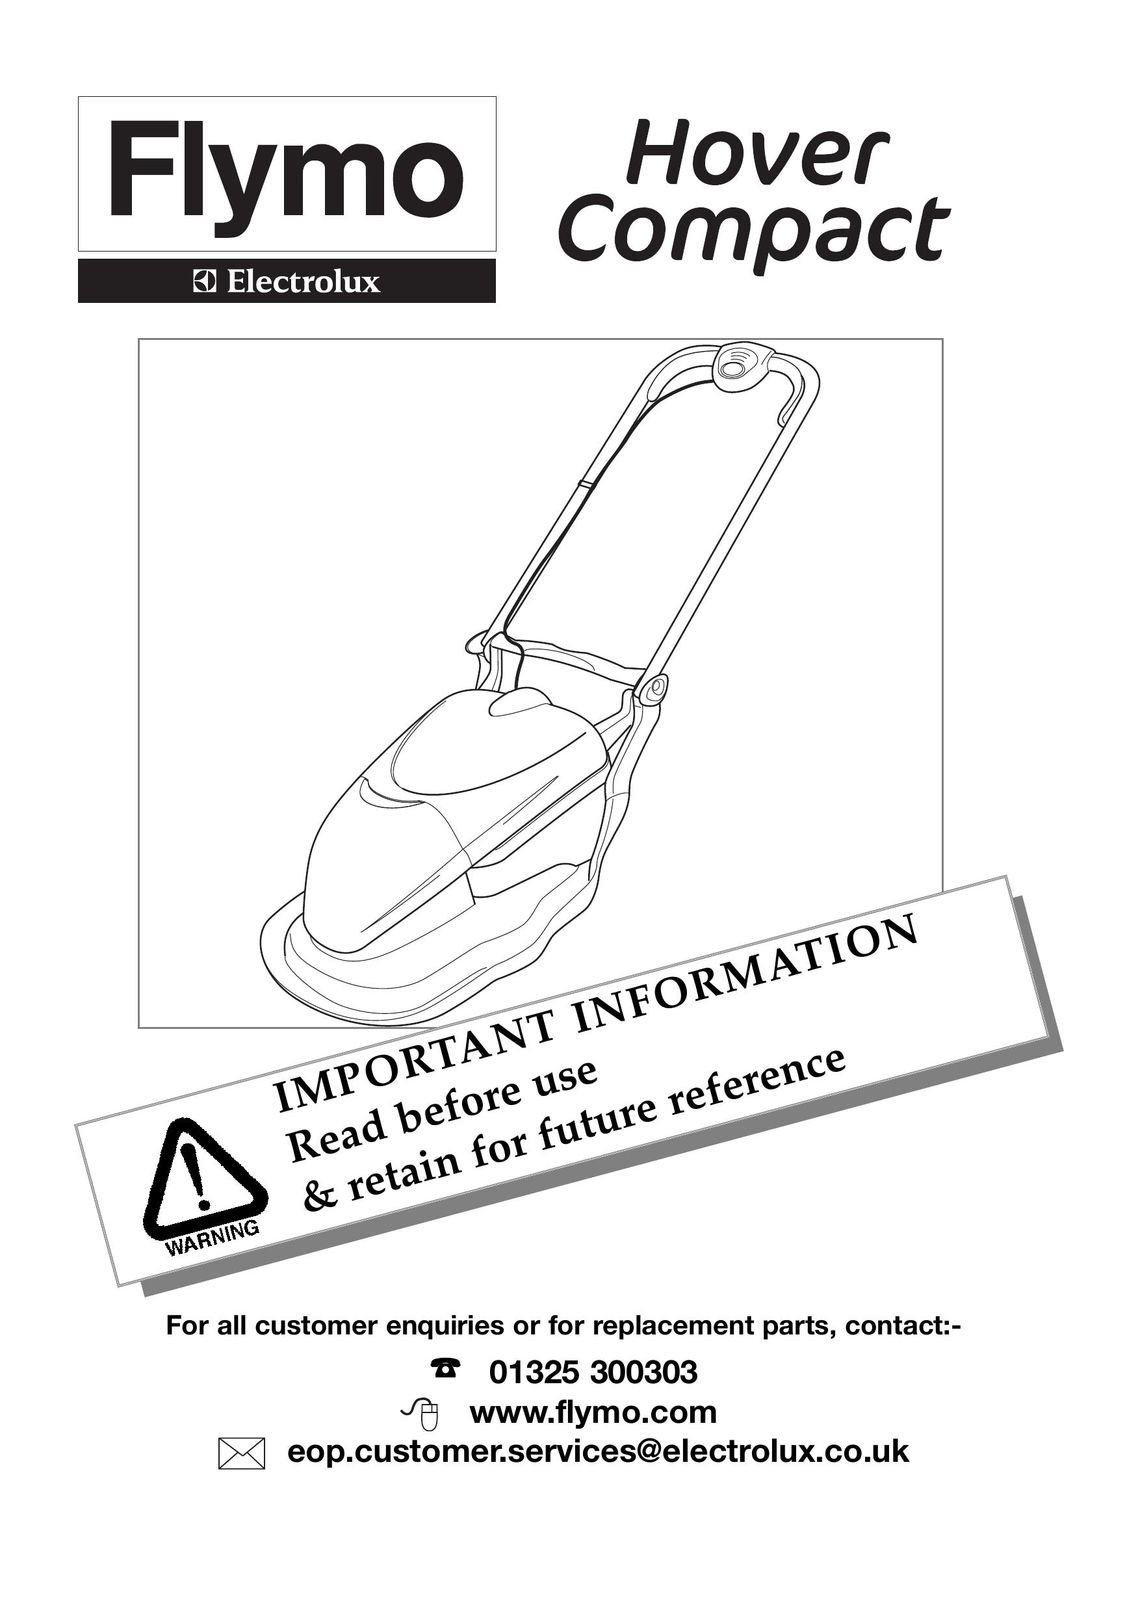 Flymo Hover Compact Vacuum Cleaner User Manual (Page 1)